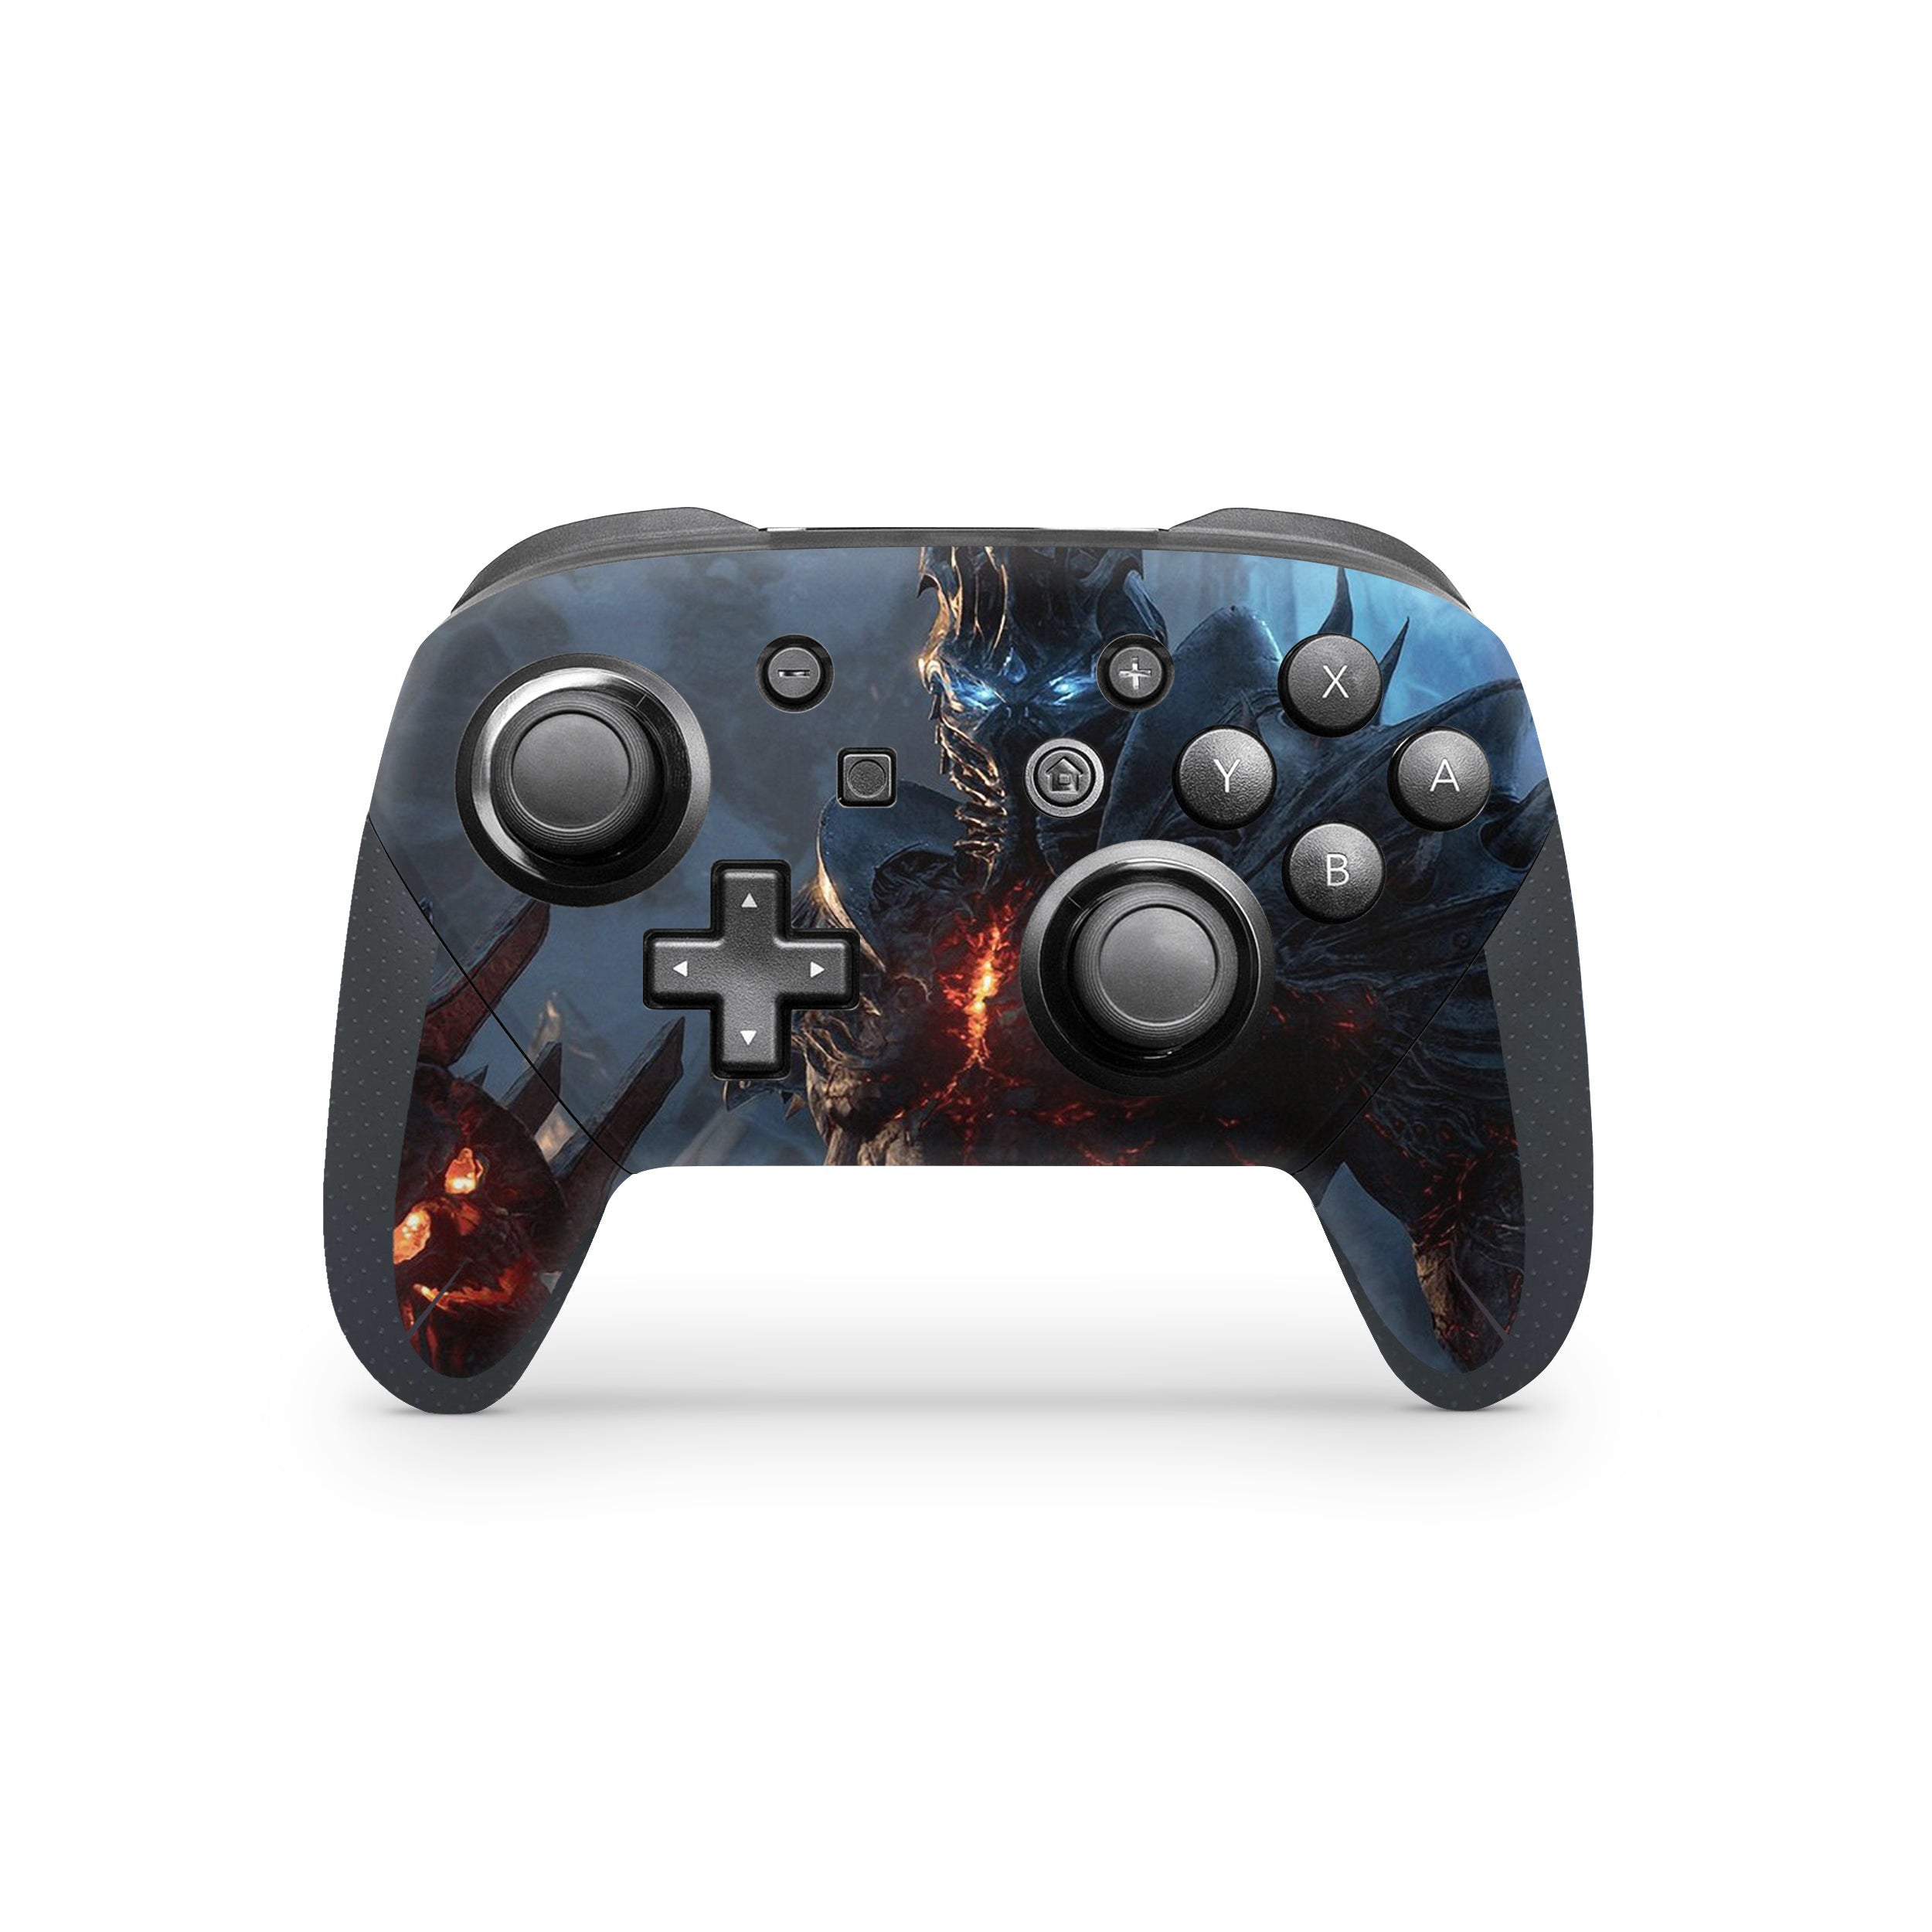 A video game skin featuring a World of Warcraft design for the Switch Pro Controller.